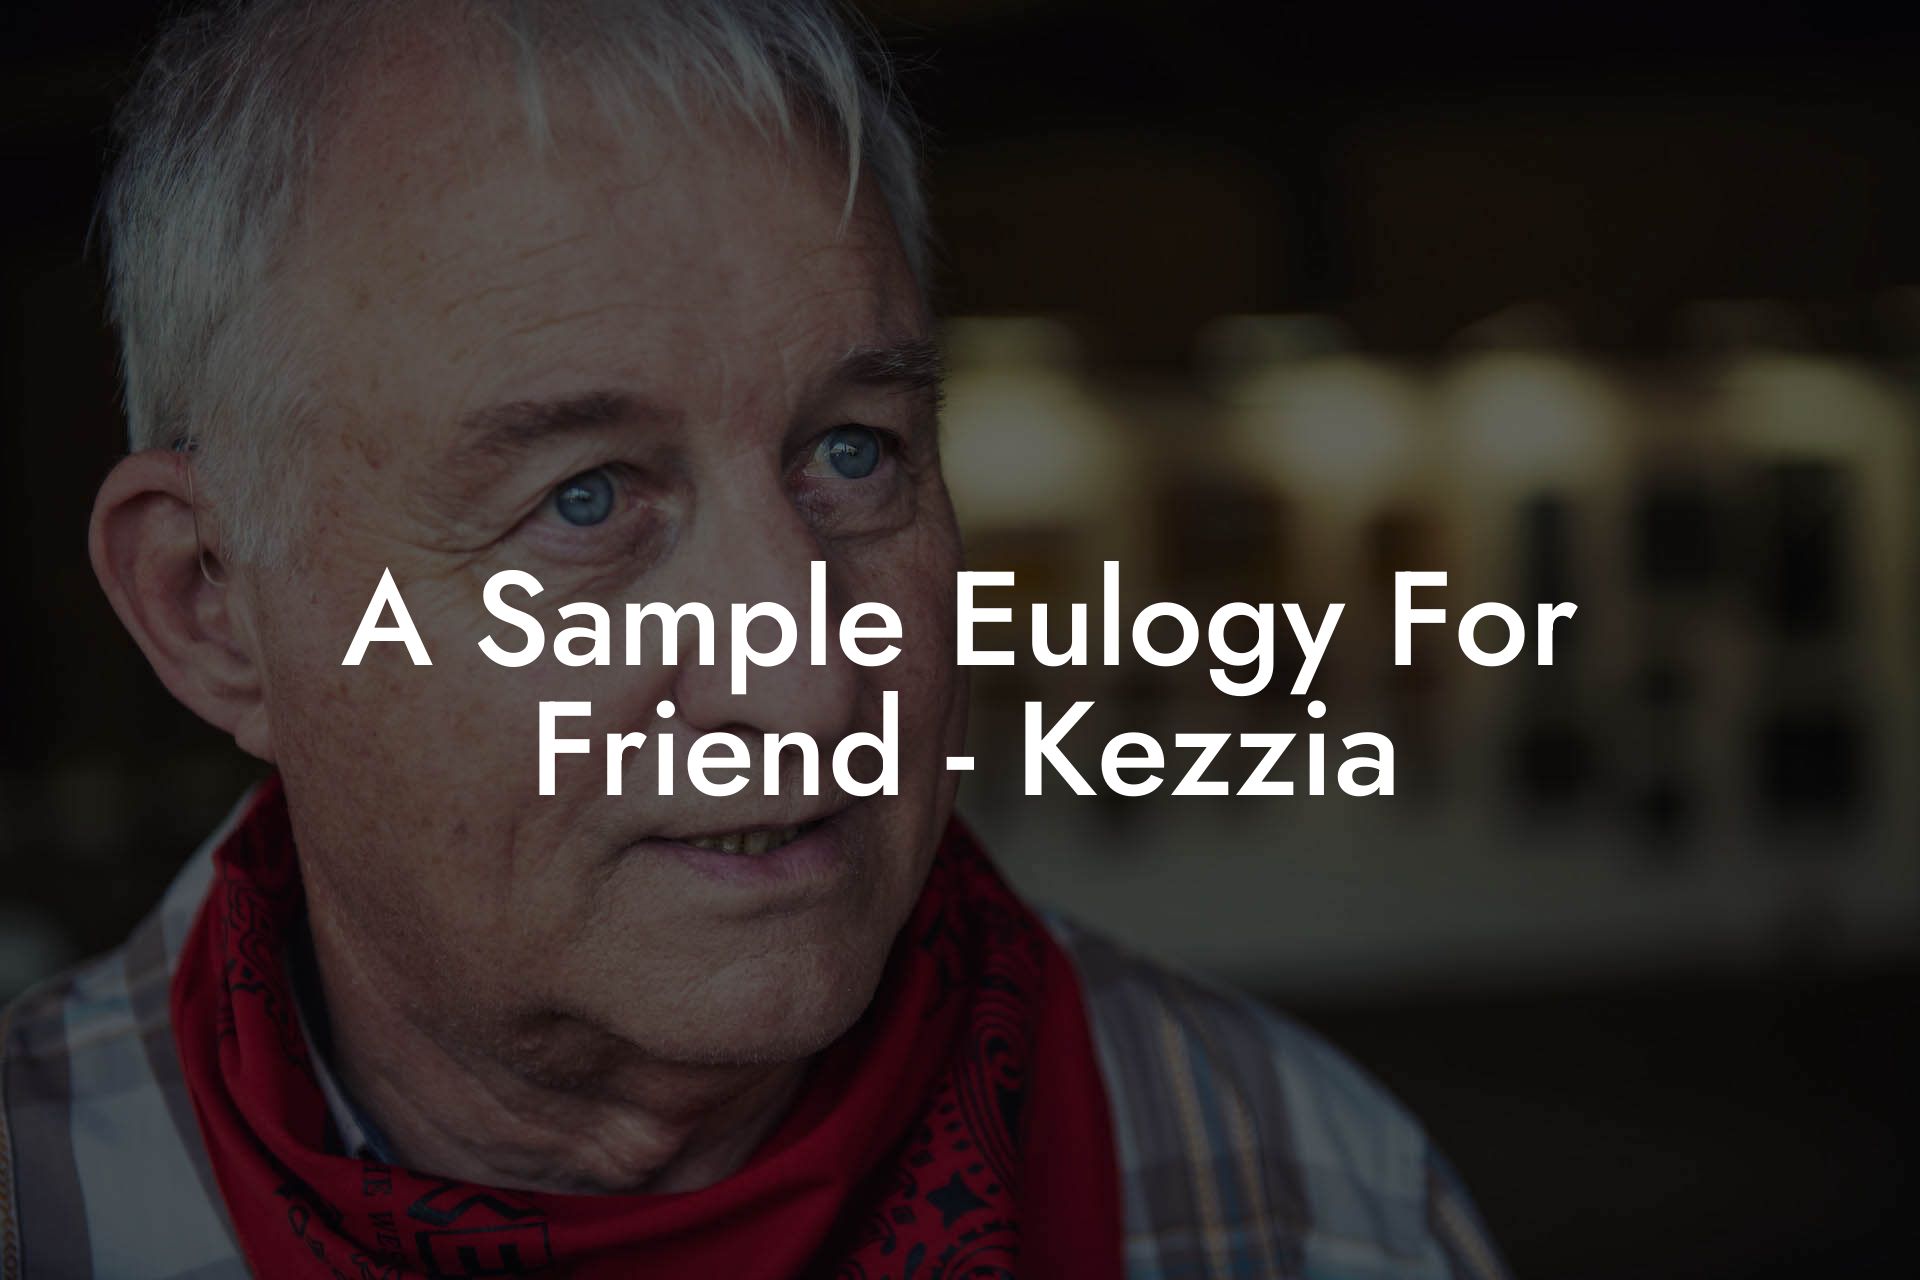 A Sample Eulogy For Friend - Kezzia